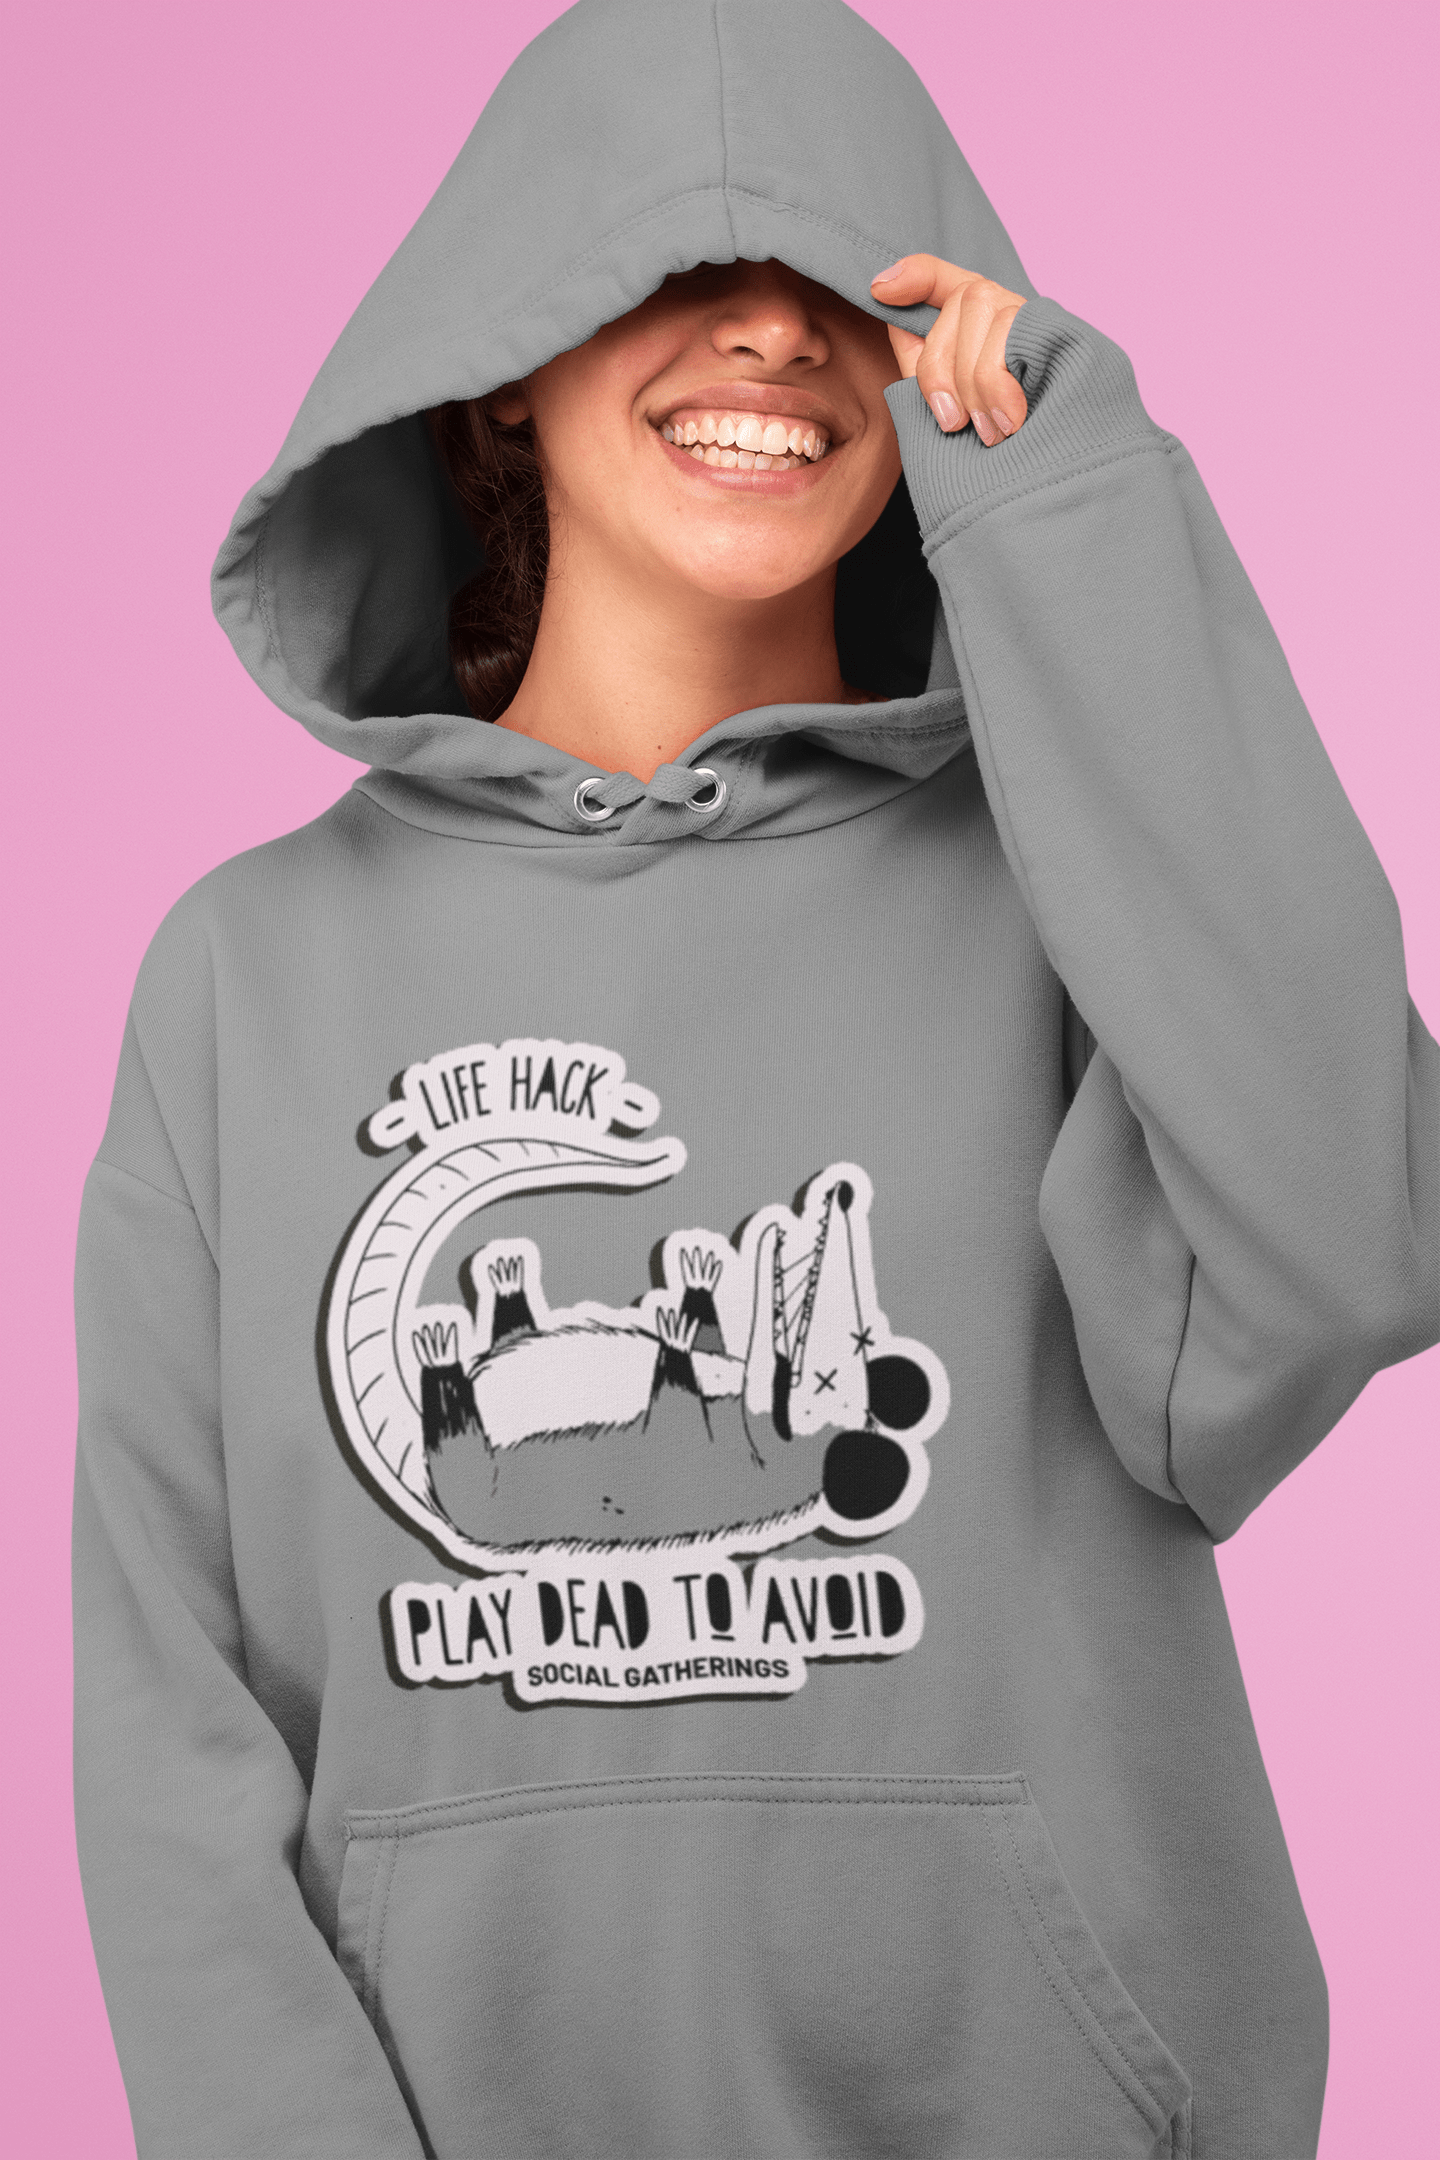 This is The Remix Hoodie LIFE HACK: PLAY DEAD TO AVOID SOCIAL GATHERINGS - Unisex Pullover Hoodie in Grey